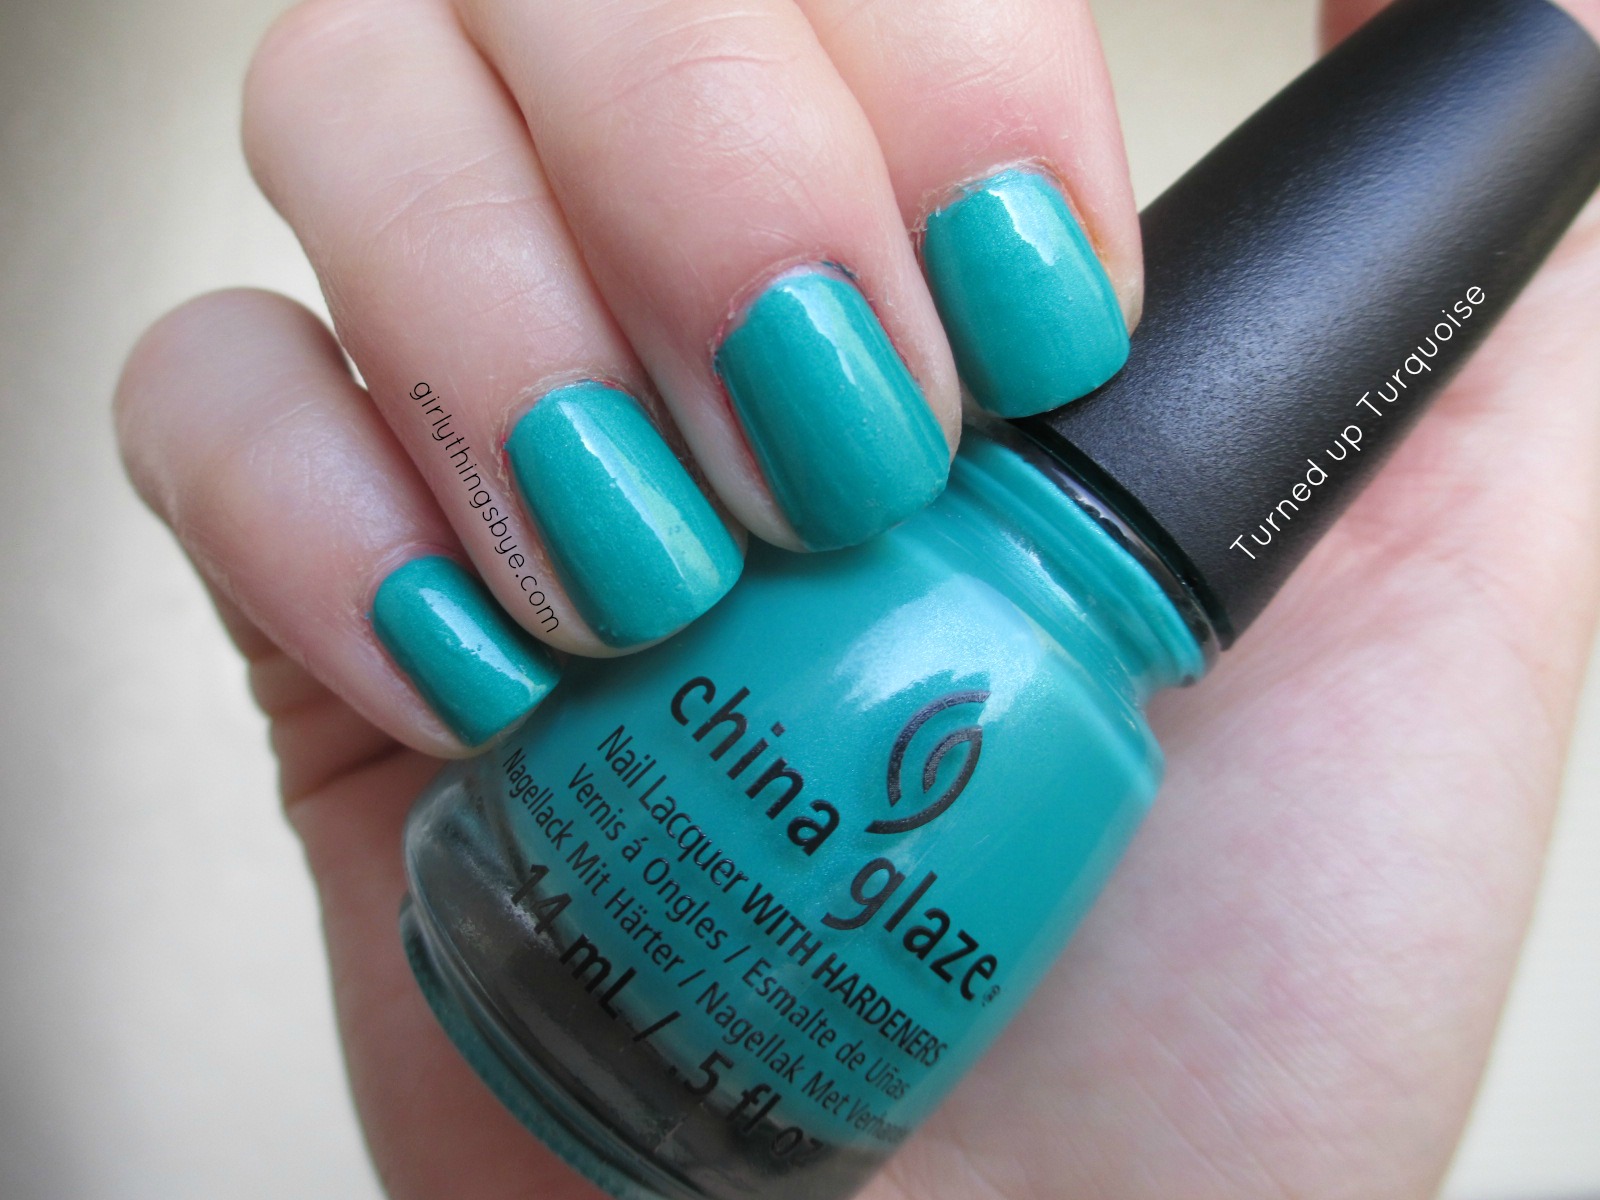 Buy China Glaze Nail Polish, Grass Is Lime Greener 1300 Online at Low  Prices in India - Amazon.in